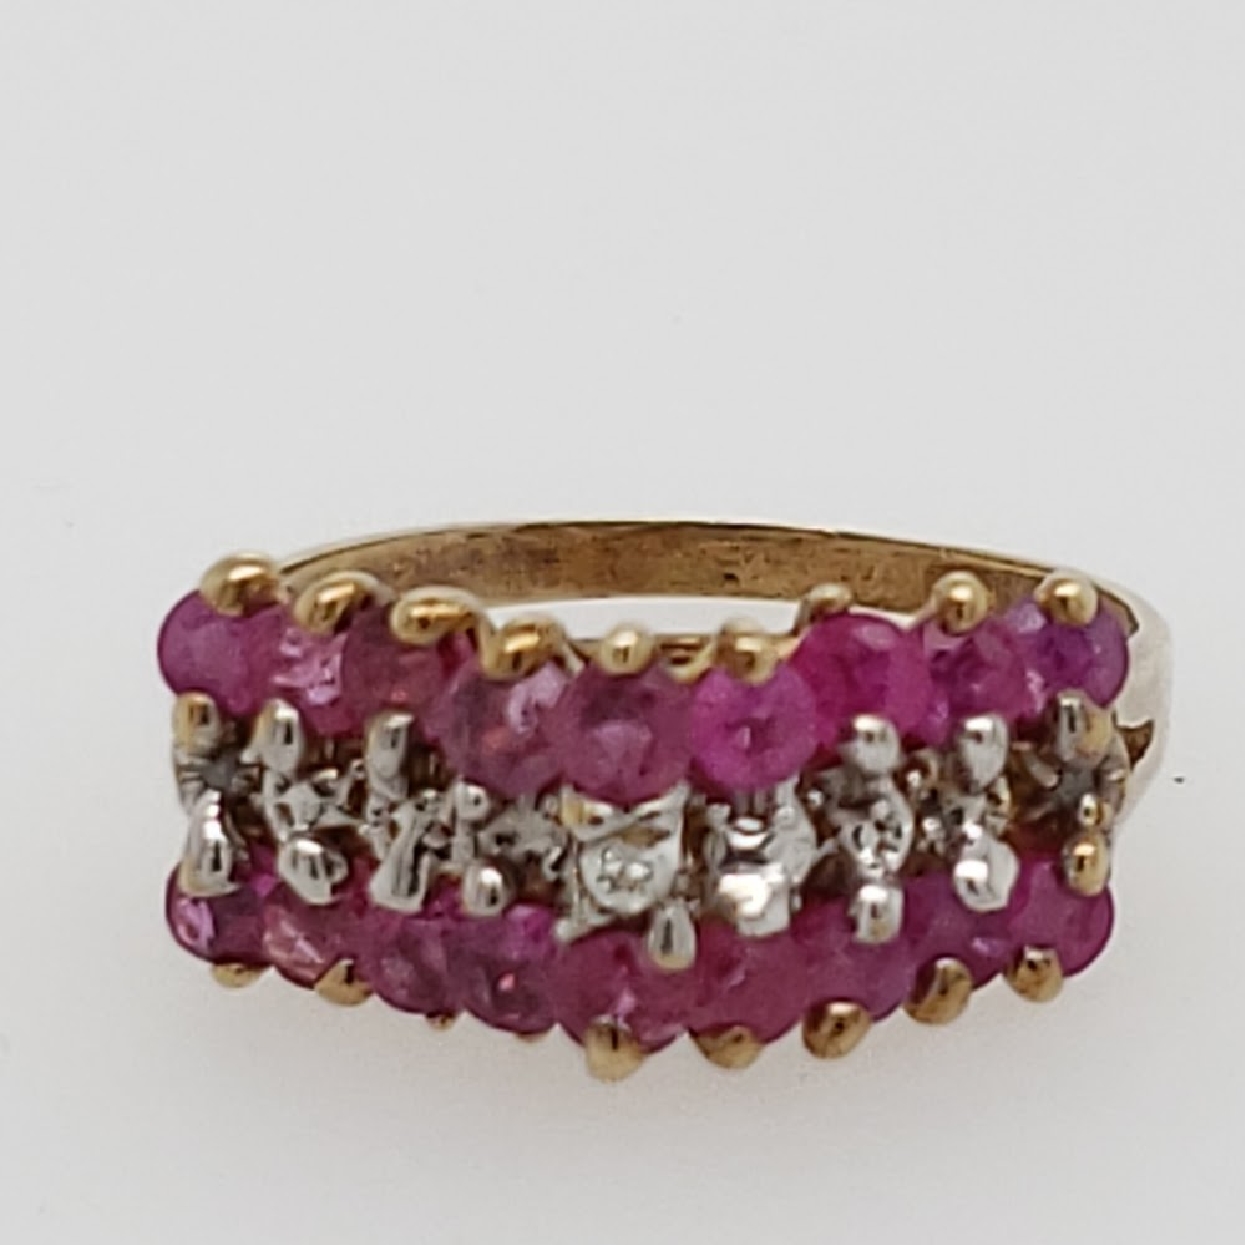 10K Yellow Gold Ring with Two Rows of Rubies and One Row of Diamonds Size 6.75